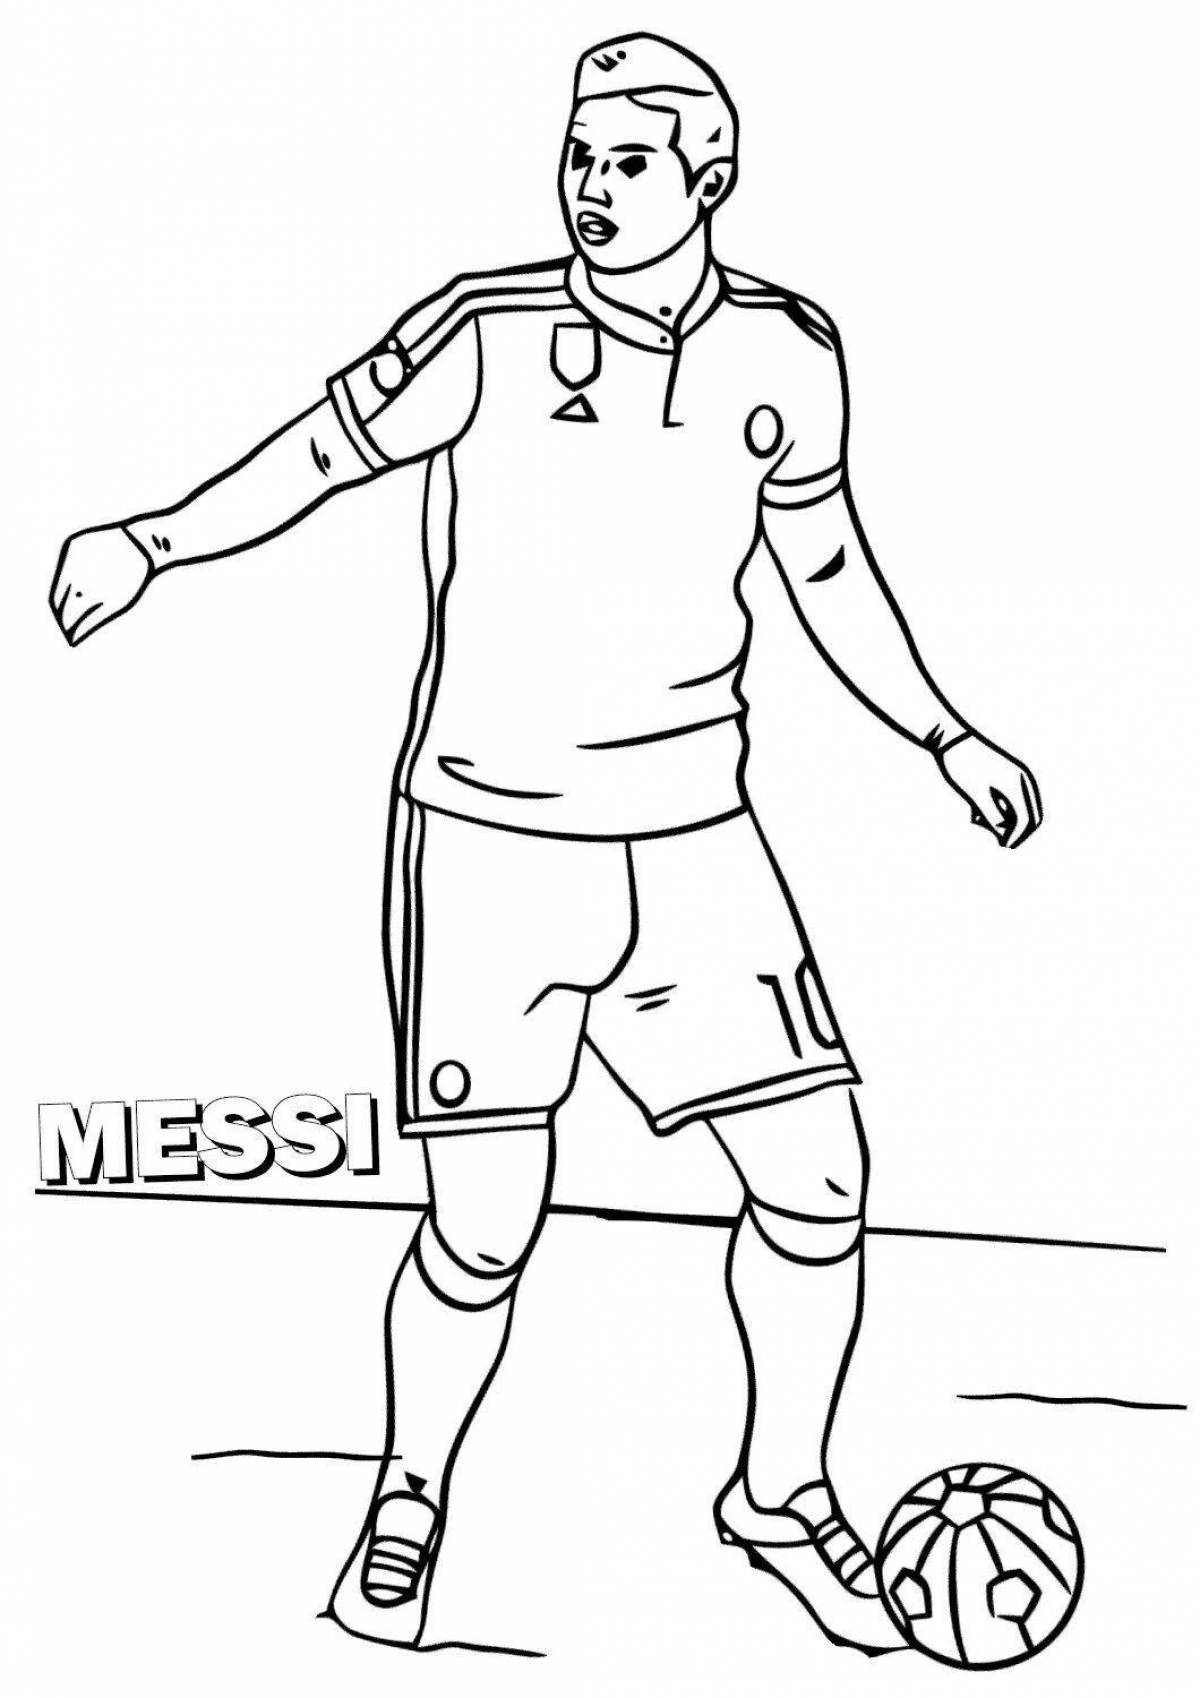 Leo messi playful coloring